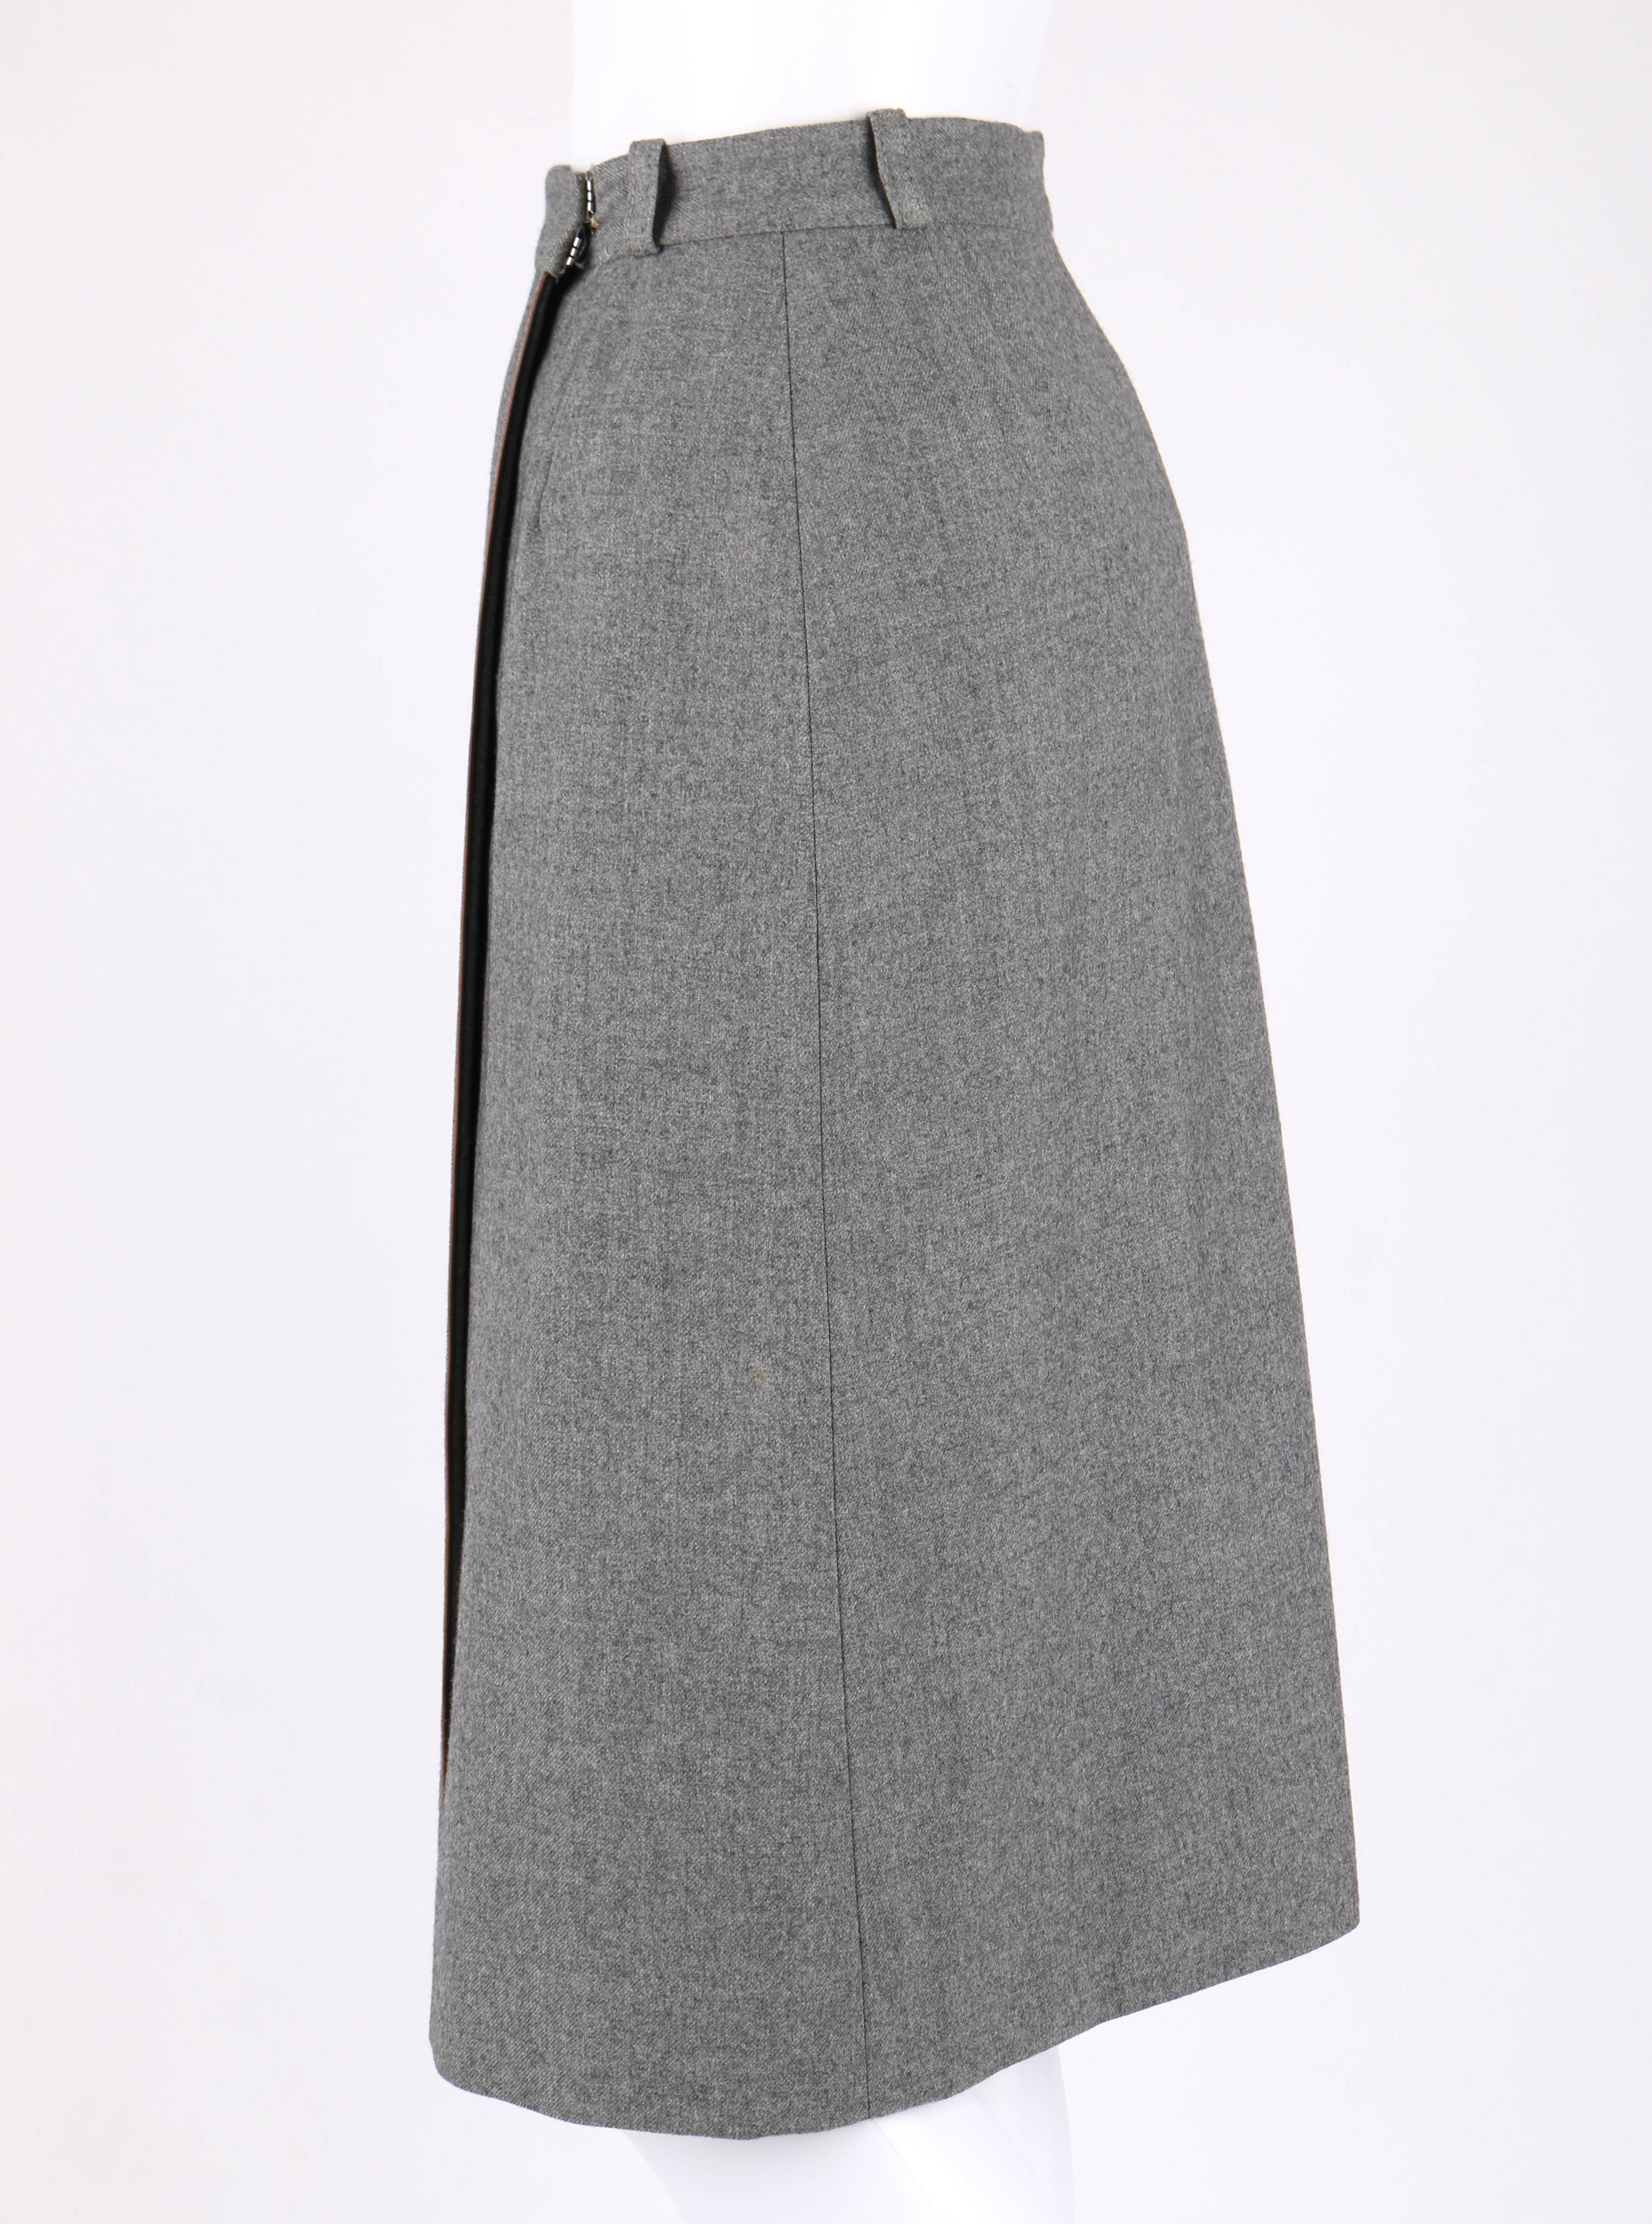 GUCCI c.1970's Gray Wool Classic Wrap Skirt Brown Leather Piping Trim For Sale 1